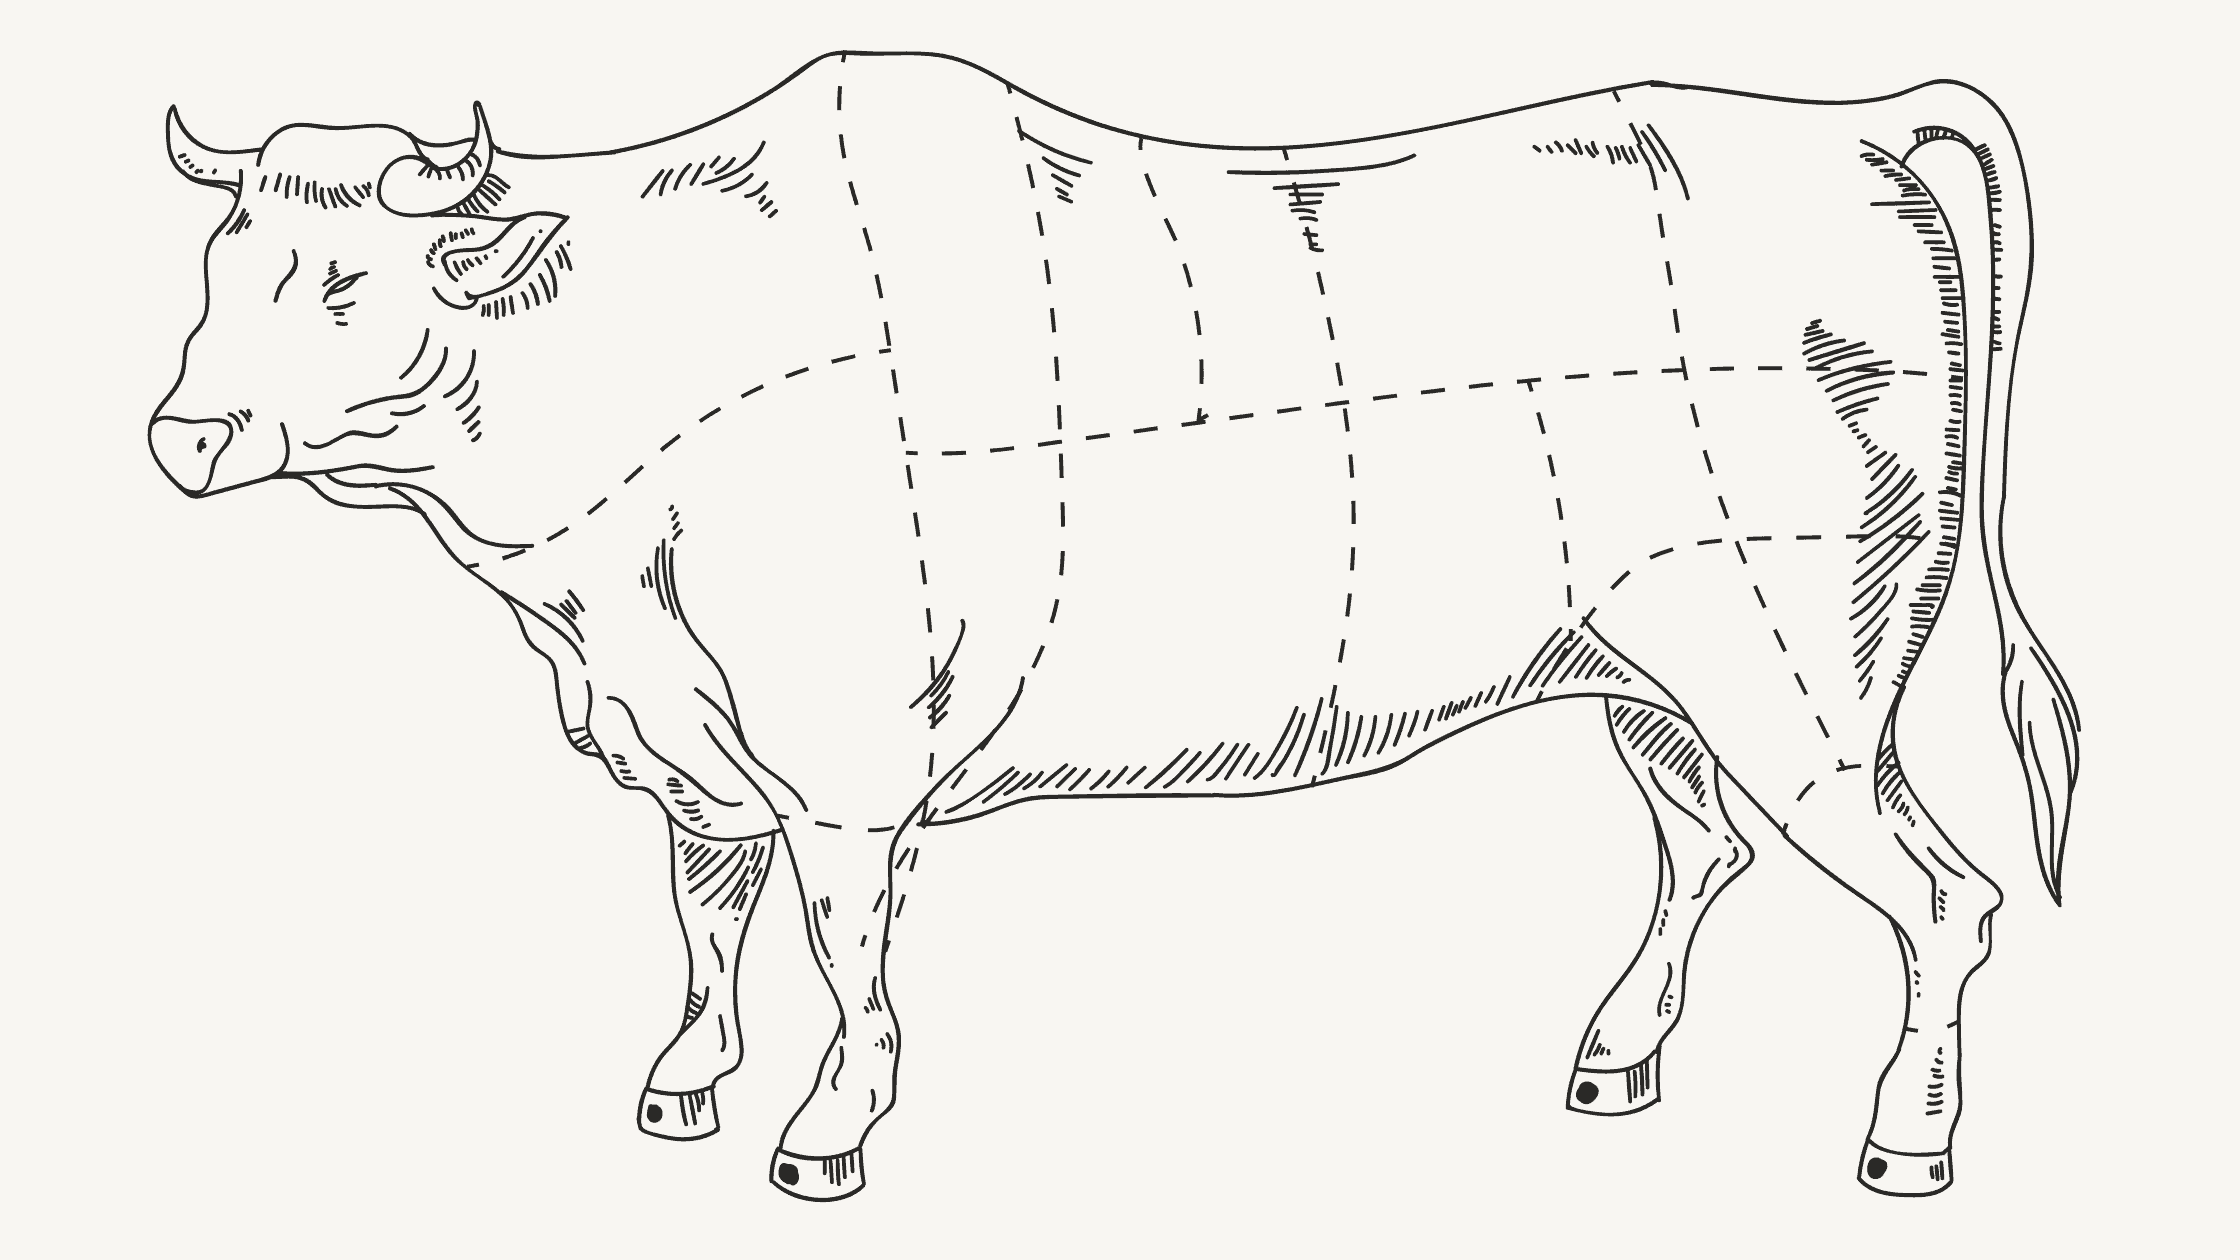 A diagram of a cow segmented to highlight the different cuts of meat